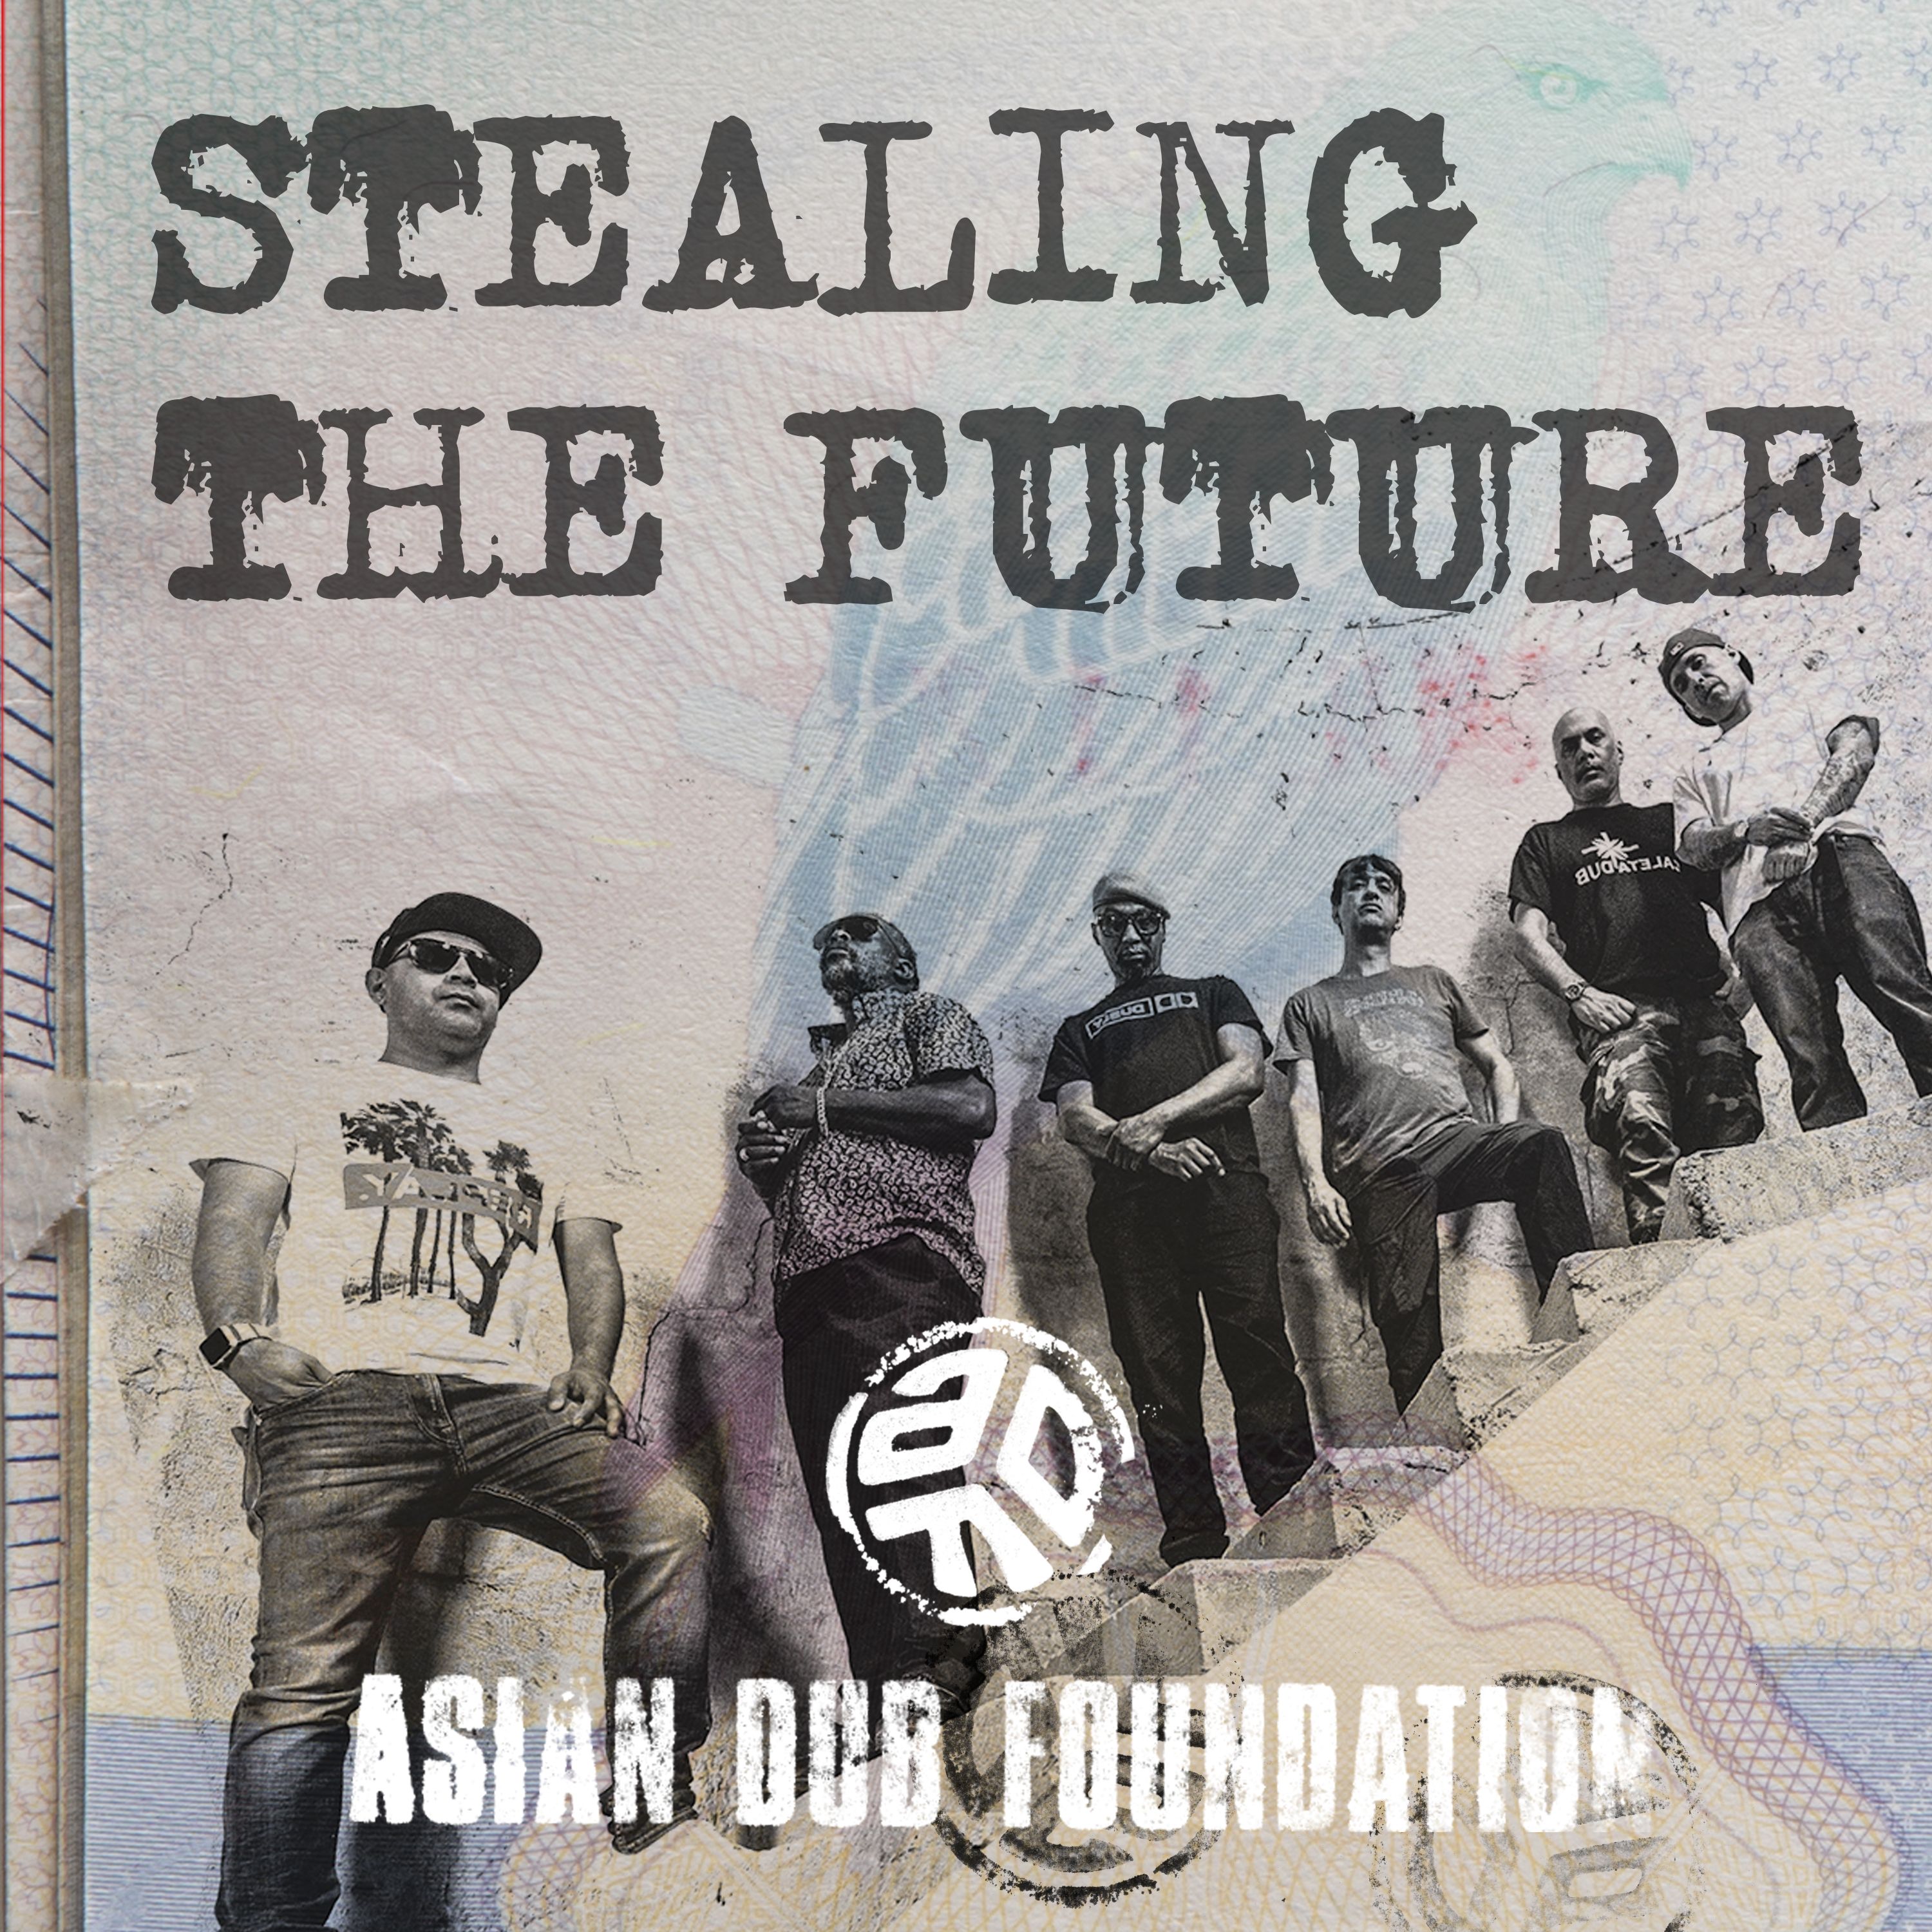 Asian Dub Foundation "Stealing the Futre"